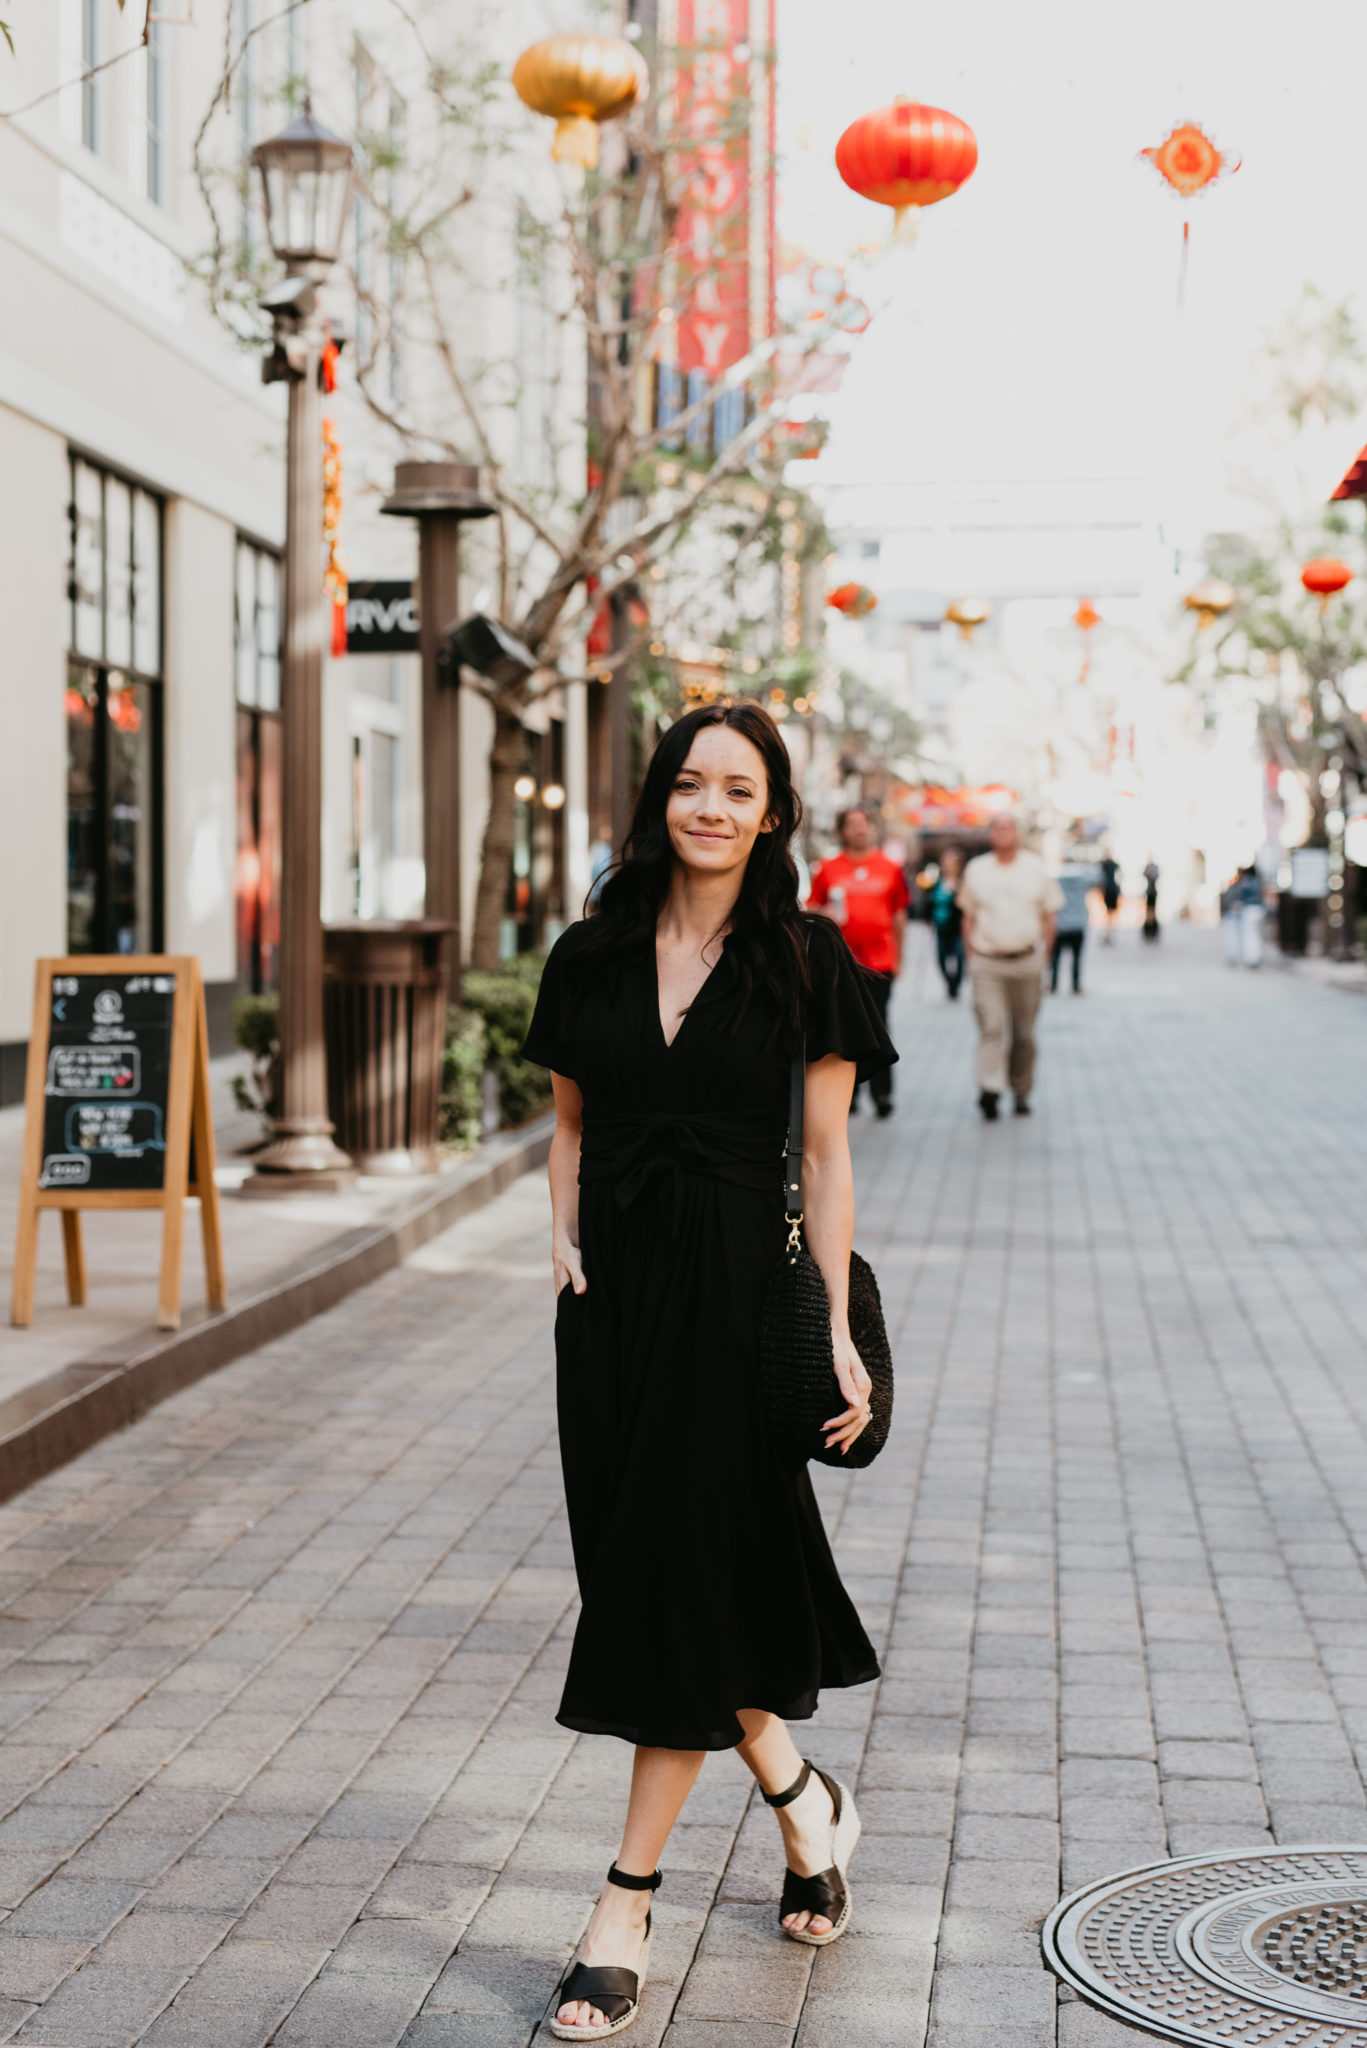 Cute Spring dress look styled by top US fashion blog, Outfits & Outings: image of a woman wearing a black Gal Meets Glam midi dress, Caslon espadrille sandals, and a Clare V straw bag